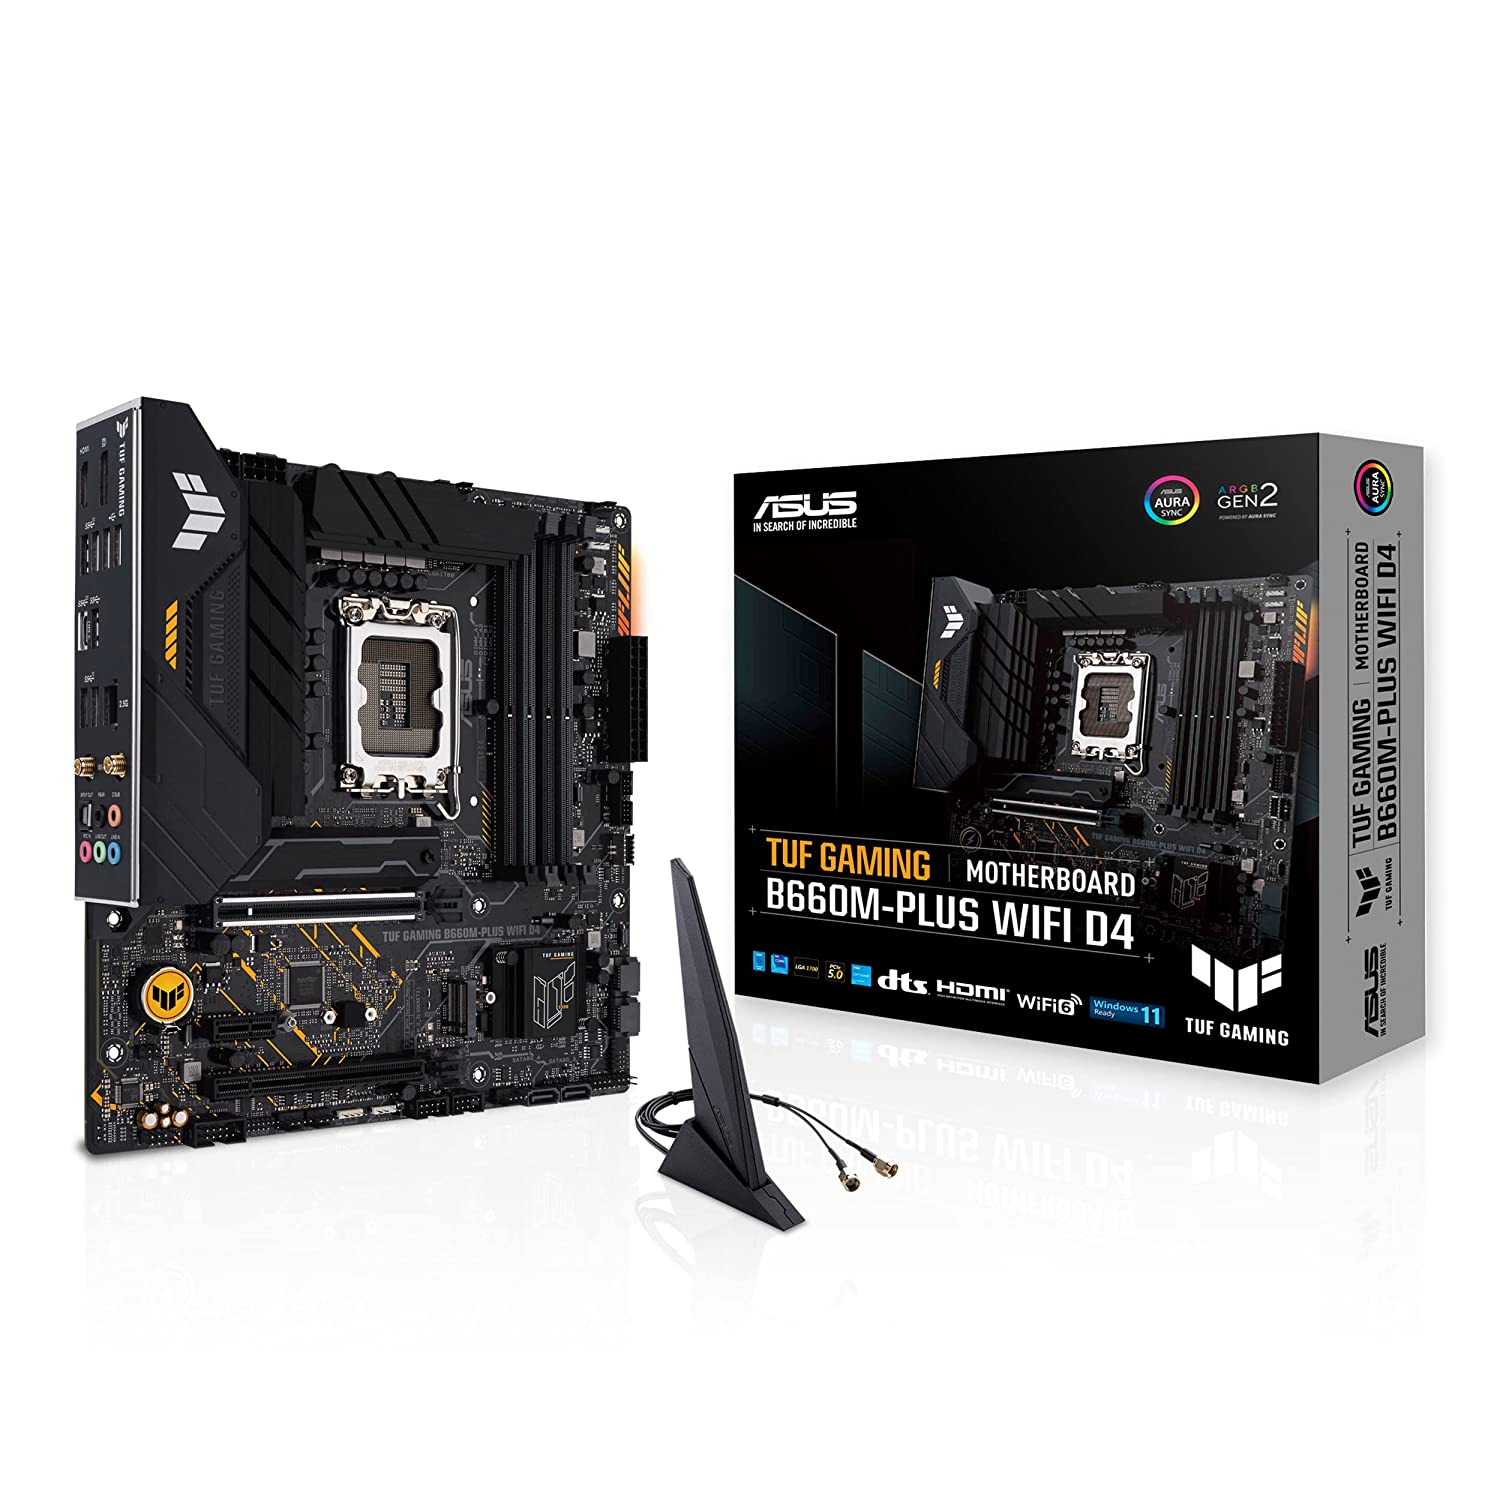 Asus TUF Gaming B660M-PLUS WIFI D4 Motherboard support latest 12th Gen Intel CPU's with LGA 1700 socket, Pentium Gold and Celeron Processors-Motherboard-dealsplant